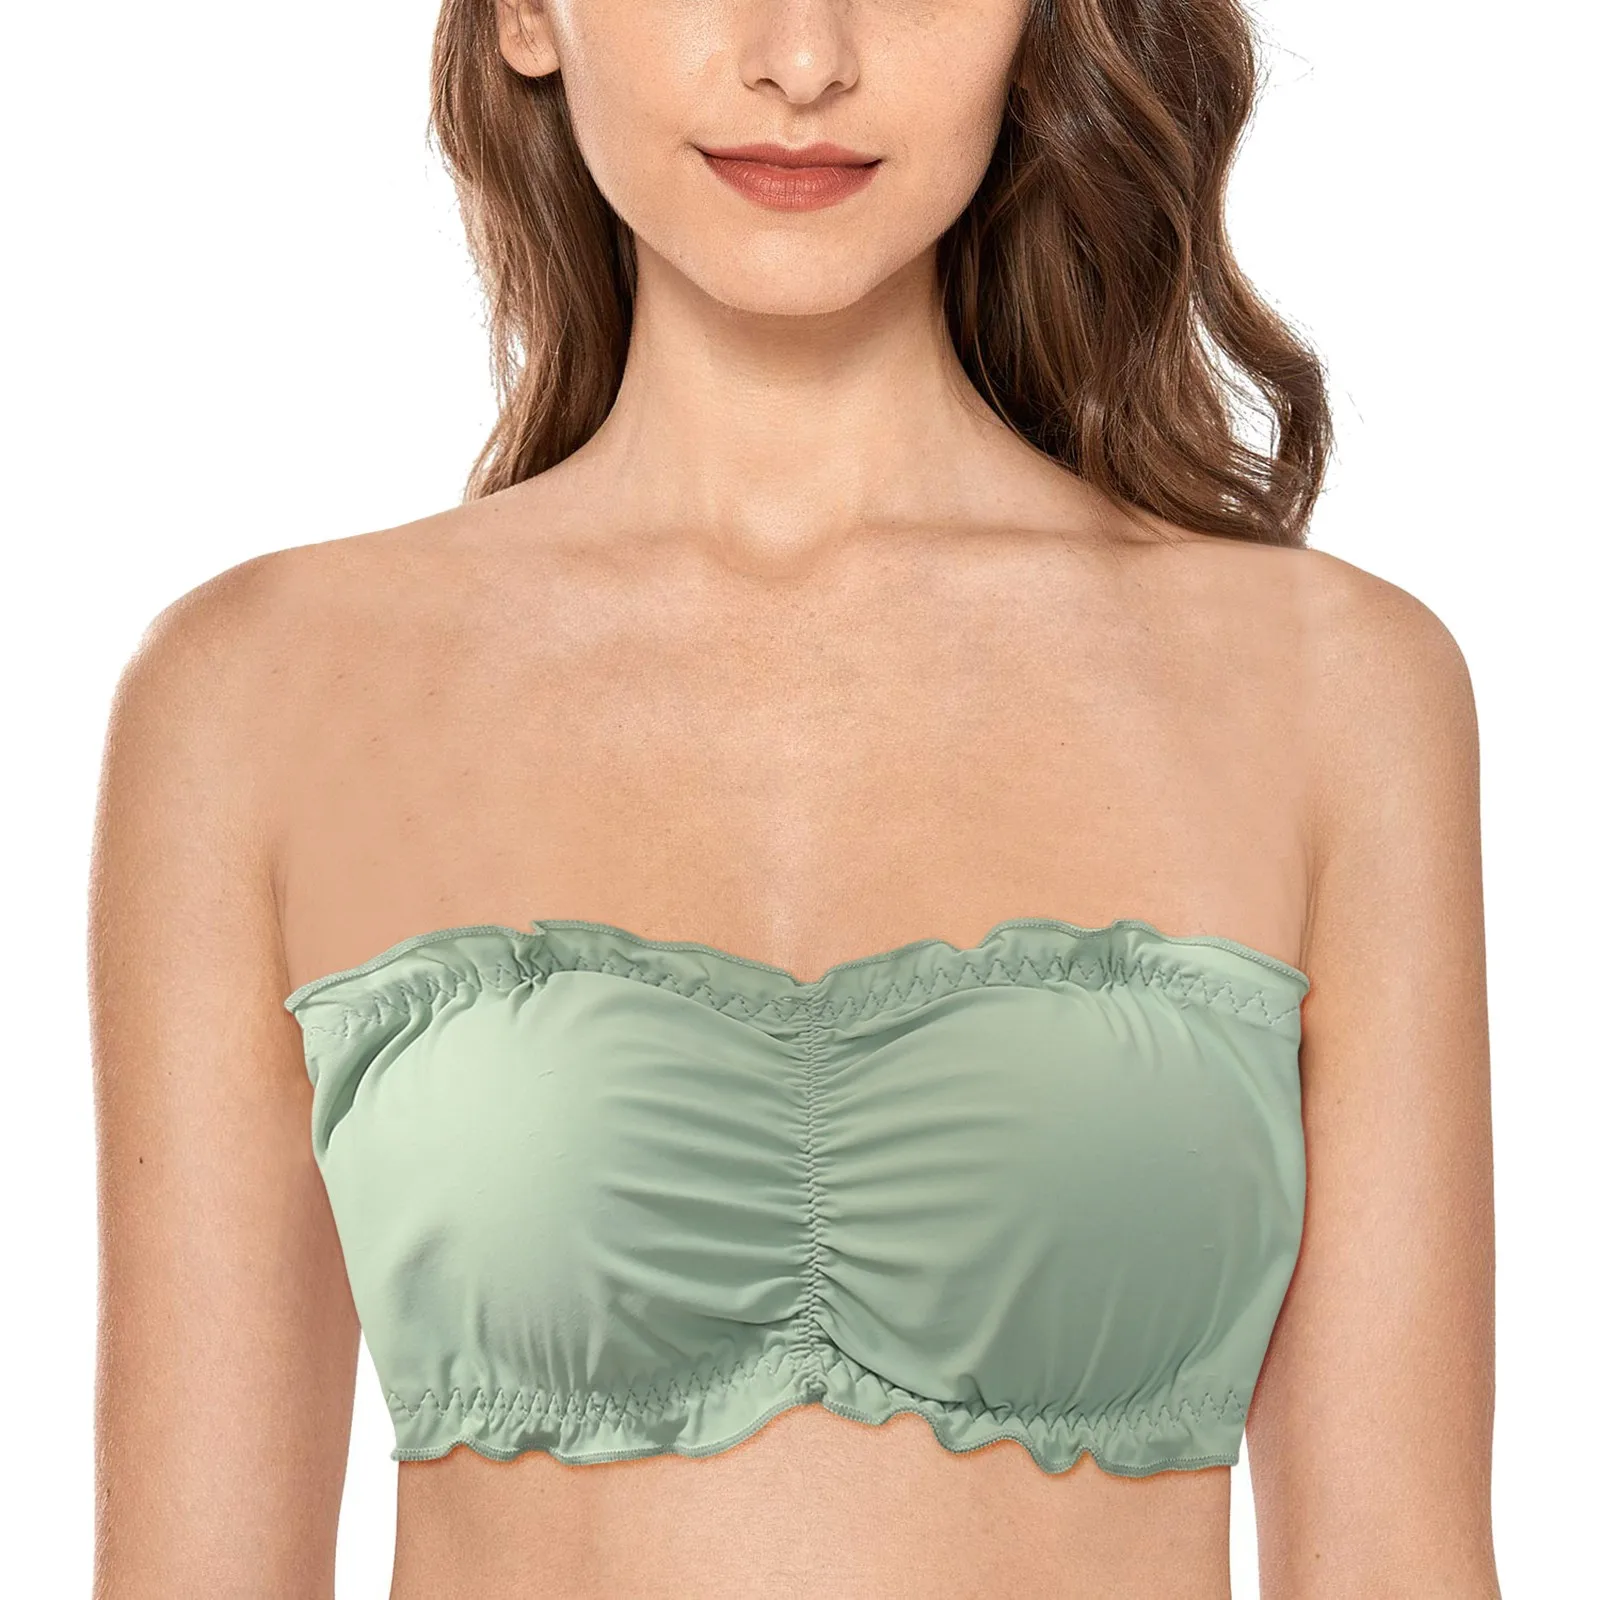 Strapless Bras Small Chest, Strapless Bra Young Girls